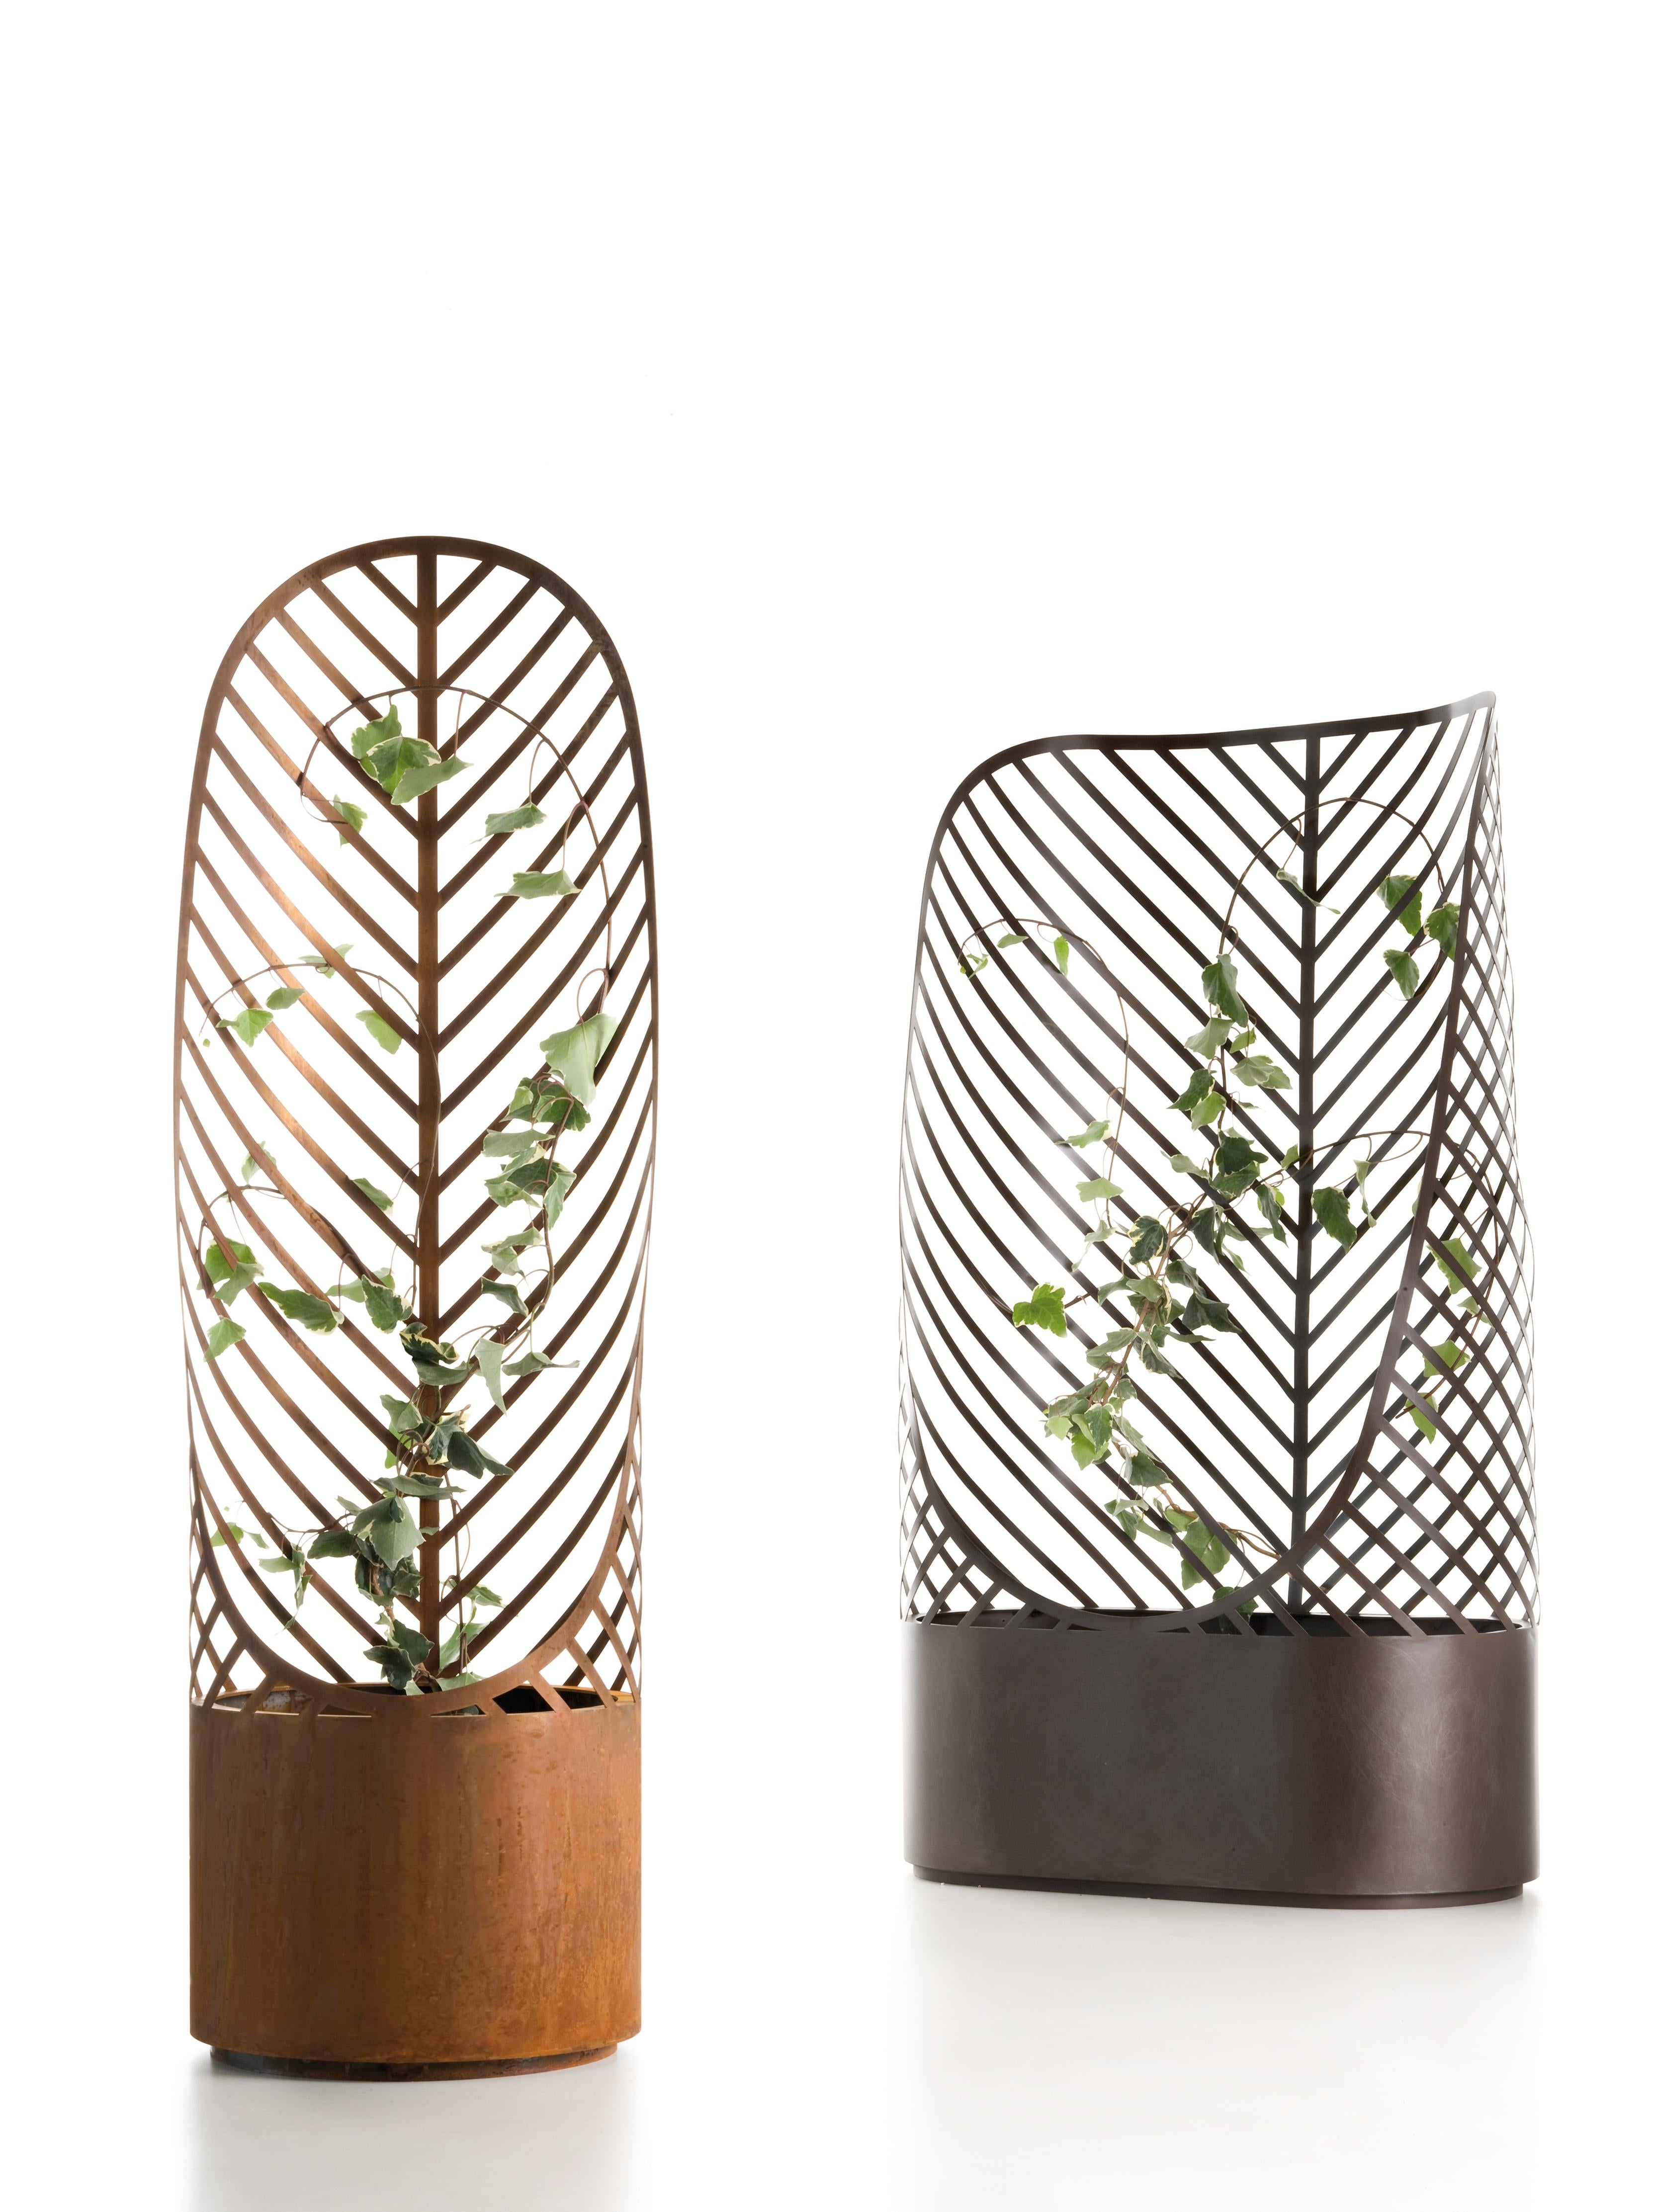 Screen-Pot is a contemporary take on the classic flower pot with a trellis for climbing vines. Its design was inspired by the shapes of nature itself: like a leaf among leaves, the trellis softly closes in on itself to embrace the plant. It can also